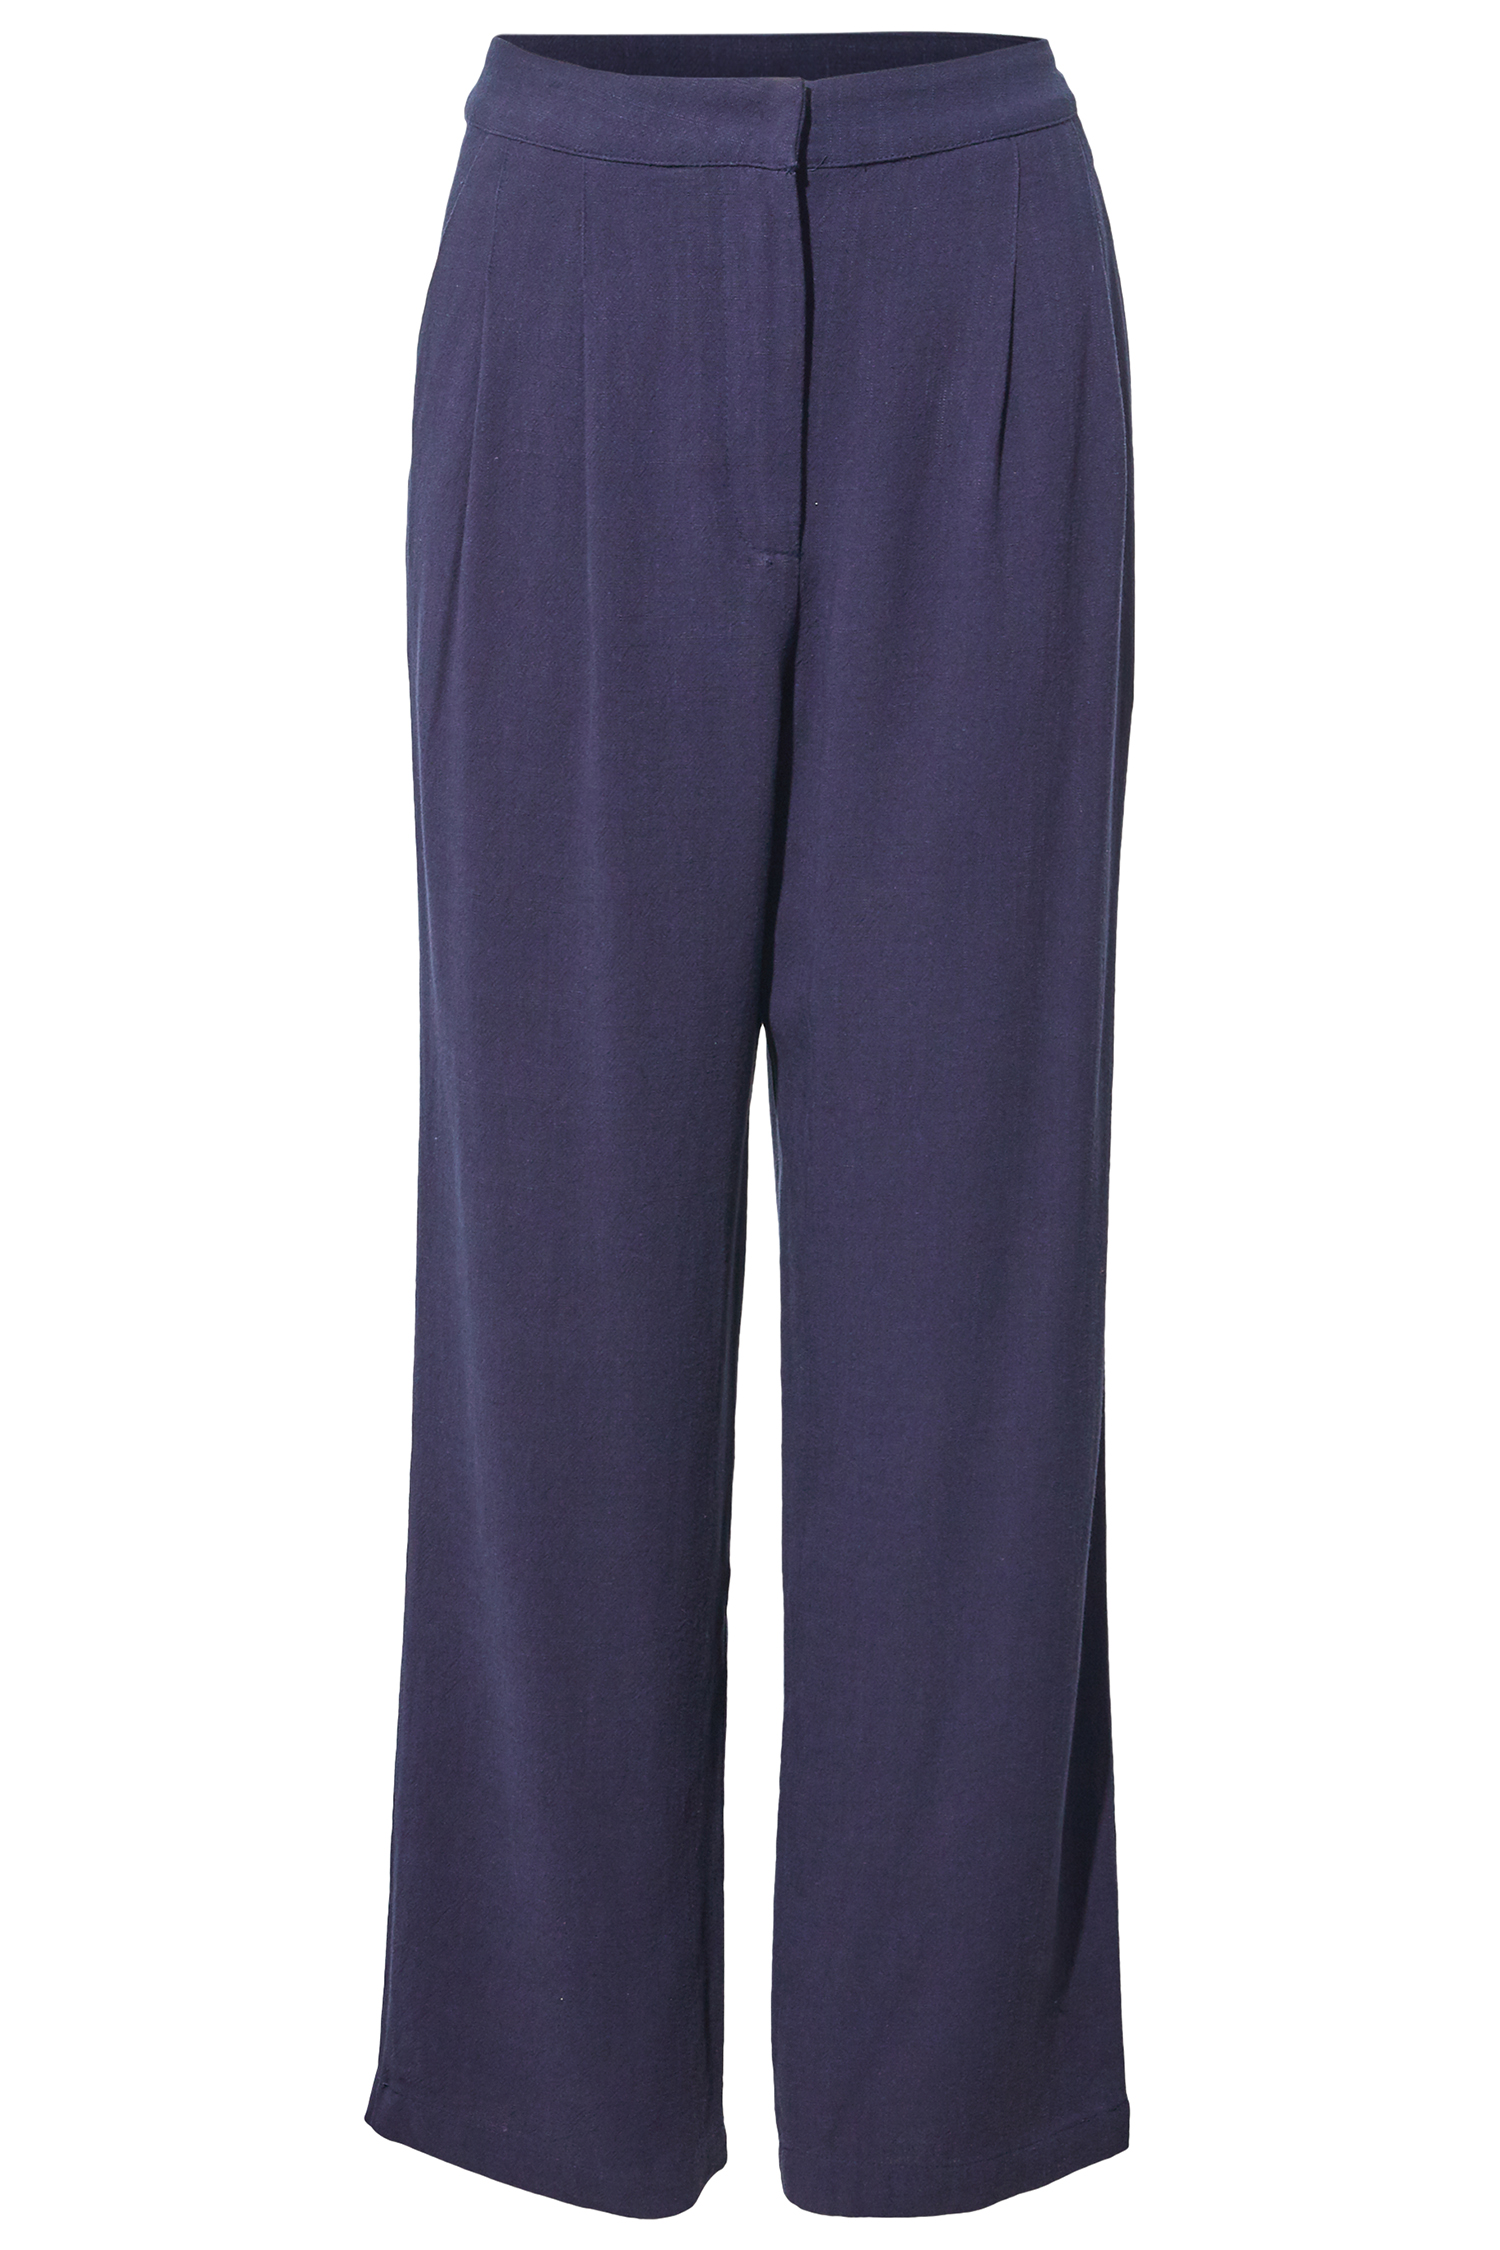 Skies Are Blue Wide Leg Trousers